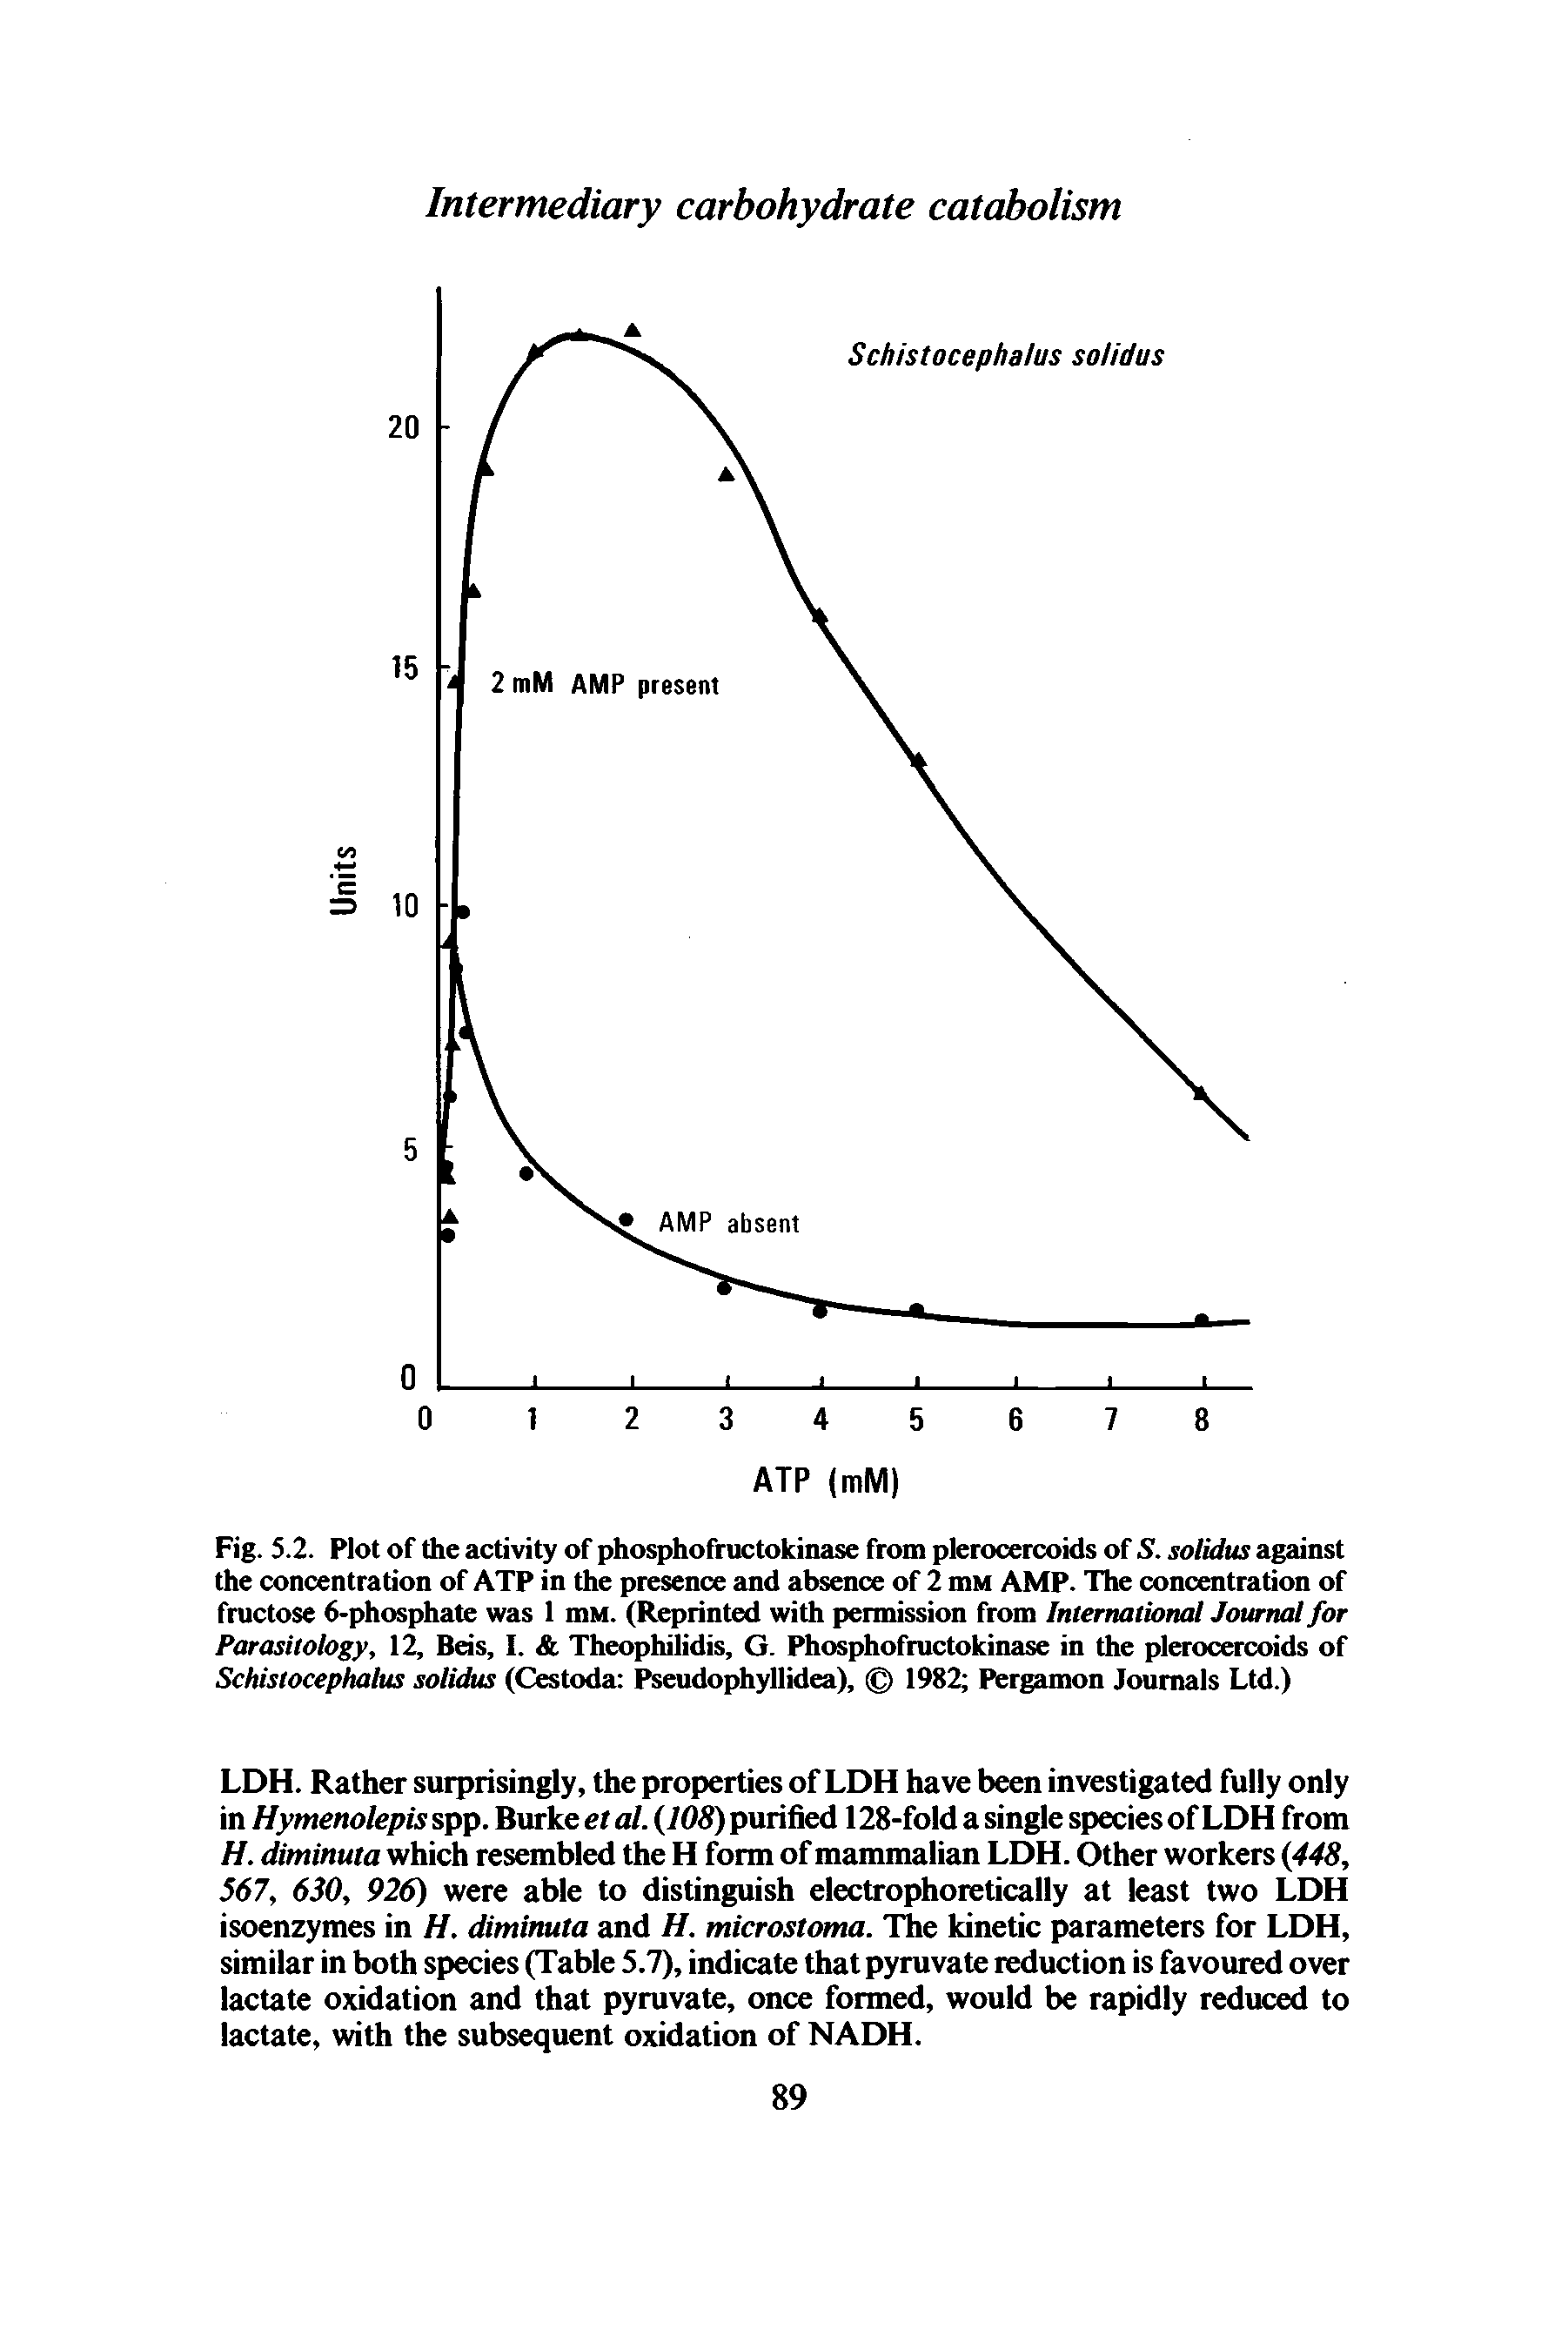 Fig. 5.2. Plot of the activity of phosphofructokinase from plerocercoids of S. solidus against the concentration of ATP in the presence and absence of 2 mM AMP. The concentration of fructose 6-phosphate was 1 mM. (Reprinted with permission from International Journal for Parasitology, 12, Beis, I. Theophilidis, G. Phosphofructokinase in the plerocercoids of Schistocephalus solidus (Cestoda Pseudophyllidea), 1982 Pergamon Journals Ltd.)...